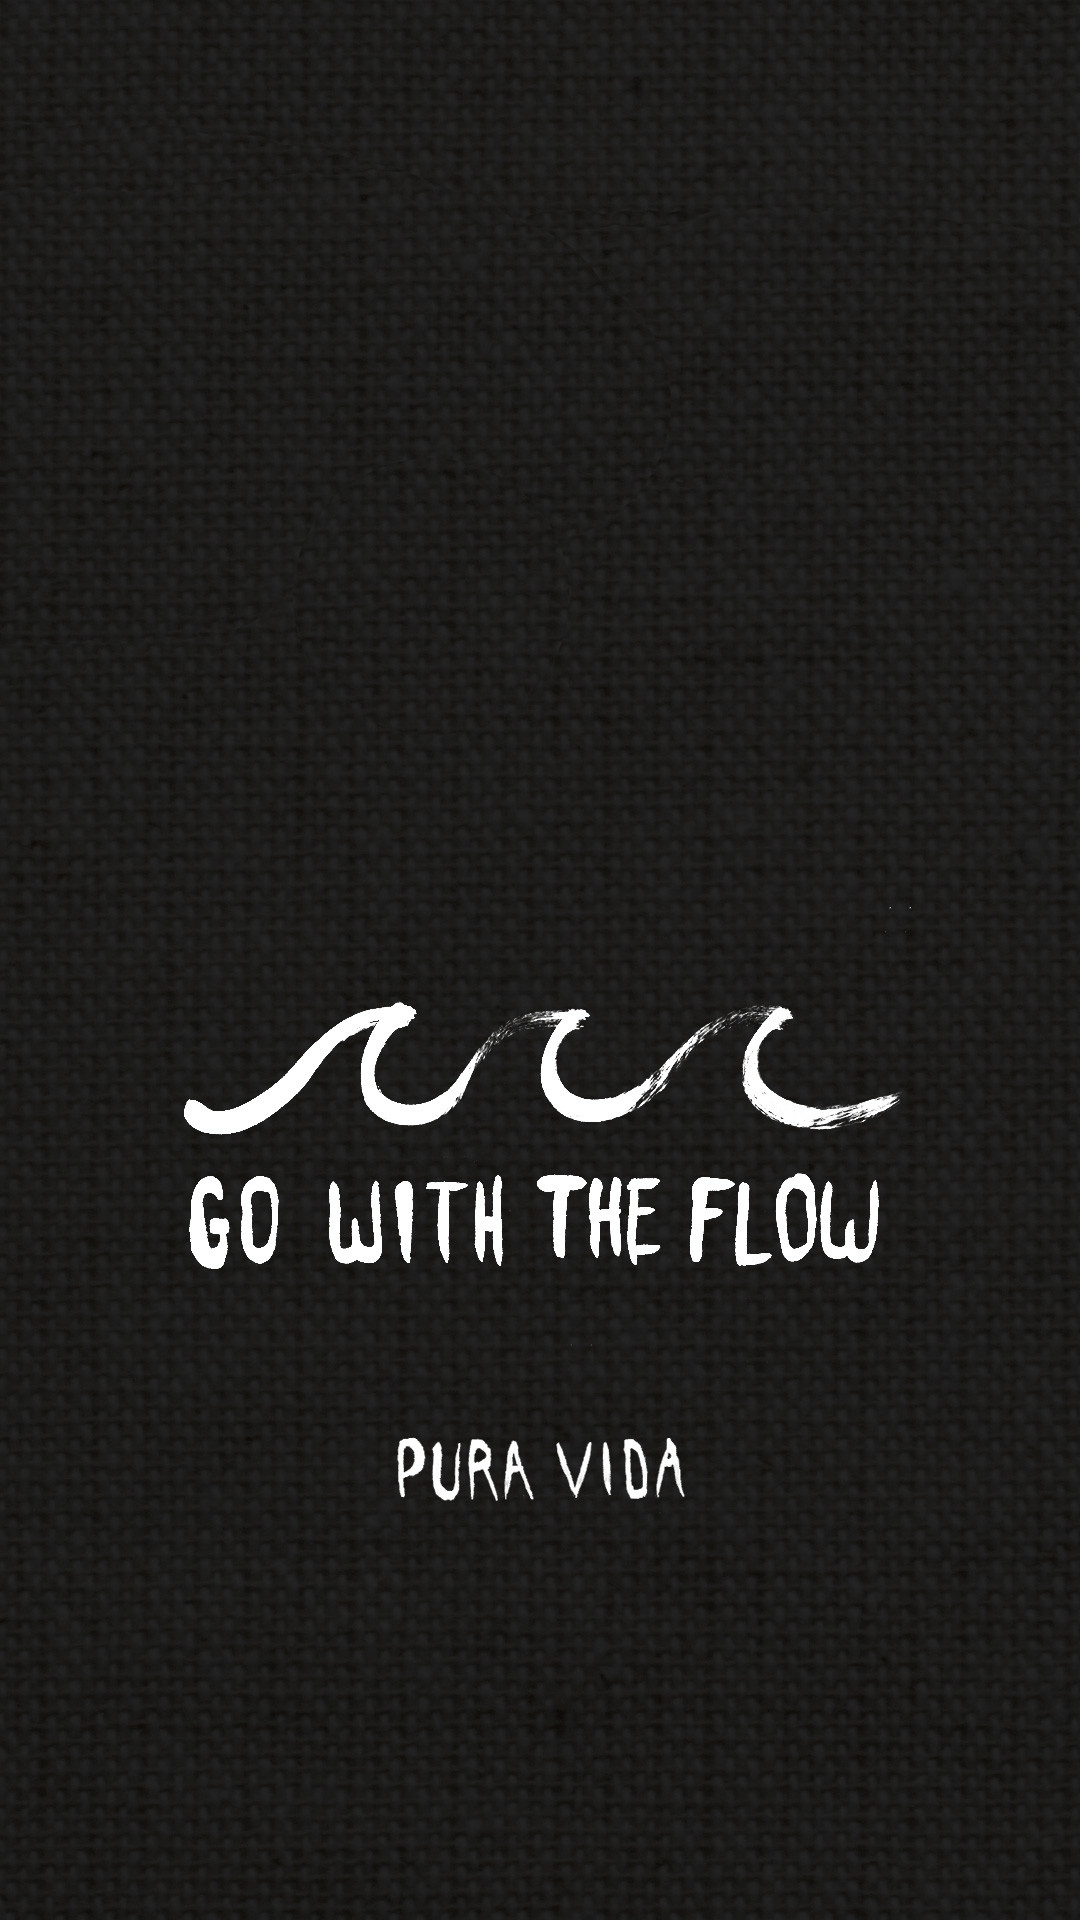 1080x1920 Go with the flow from Pura Vida // wallpaper, backgrounds